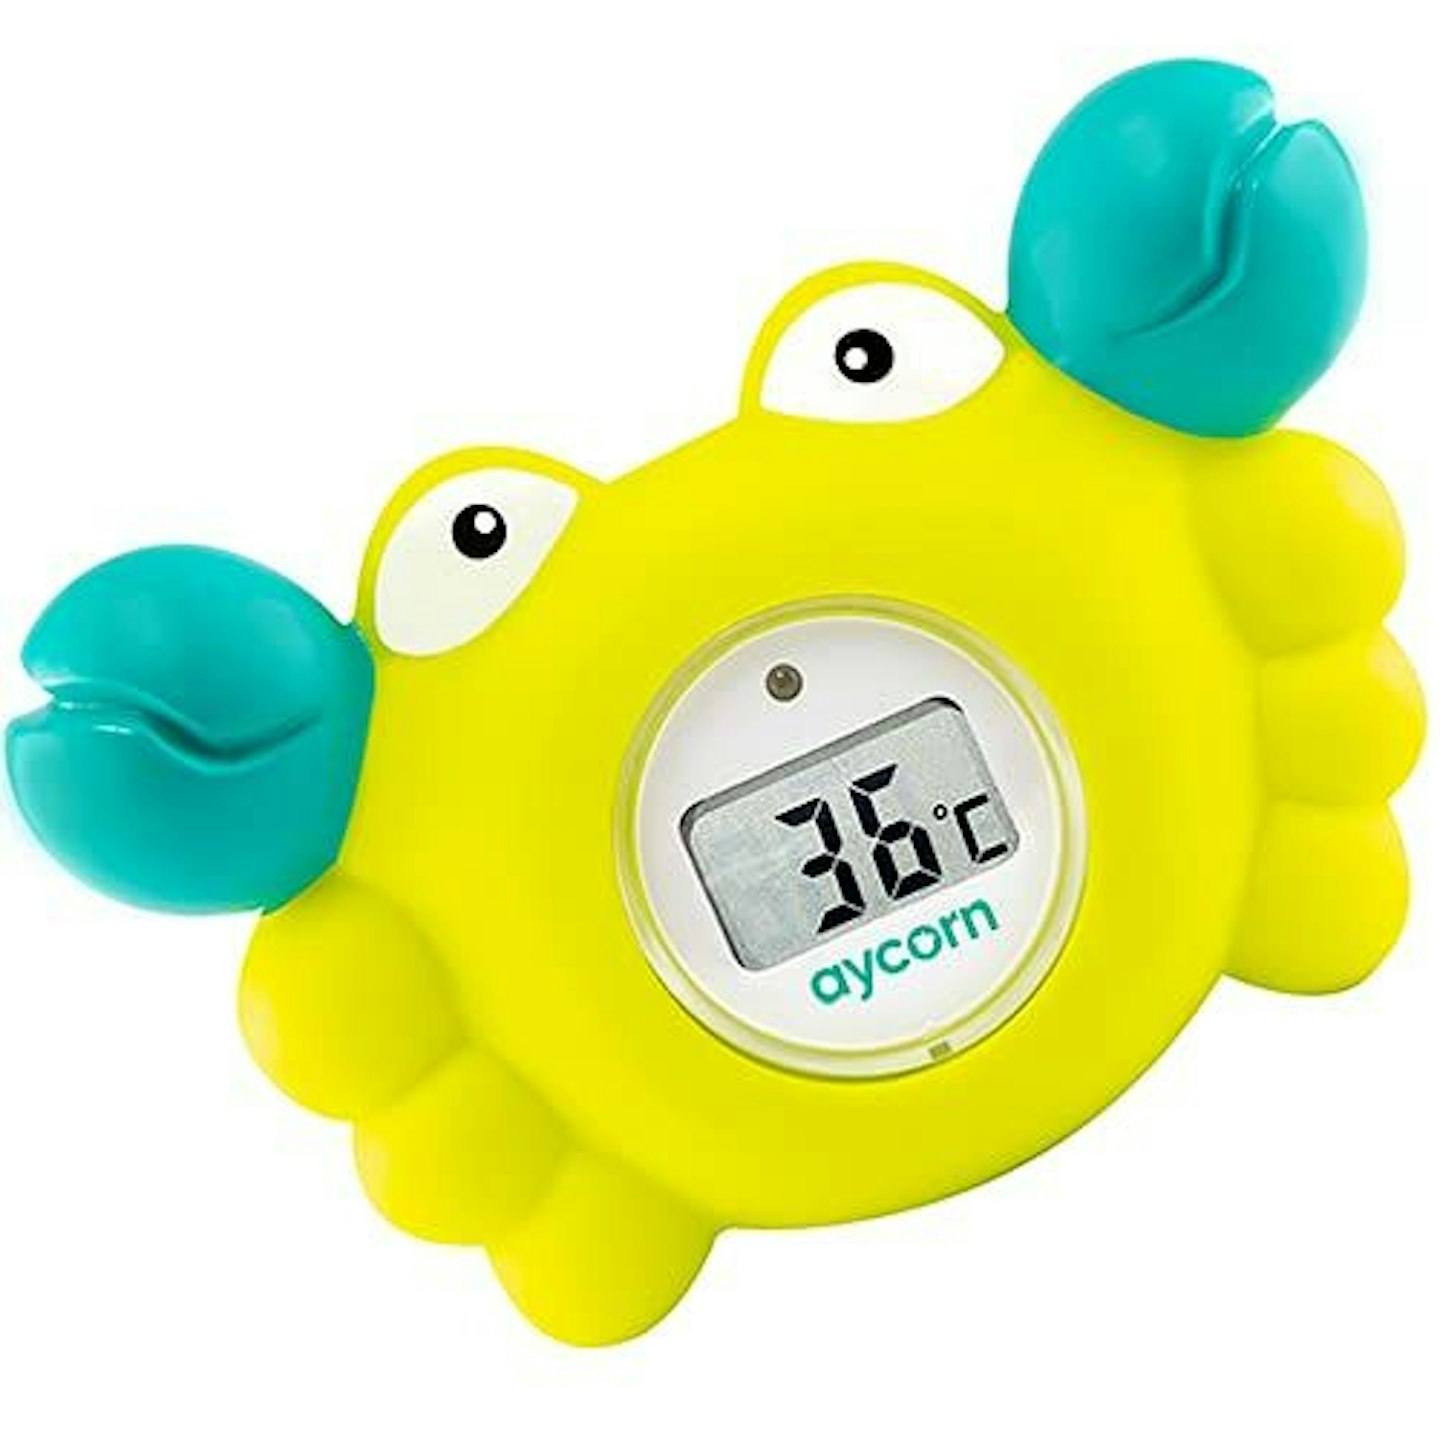 Aycorn Digital Baby Bath and Room Thermometer